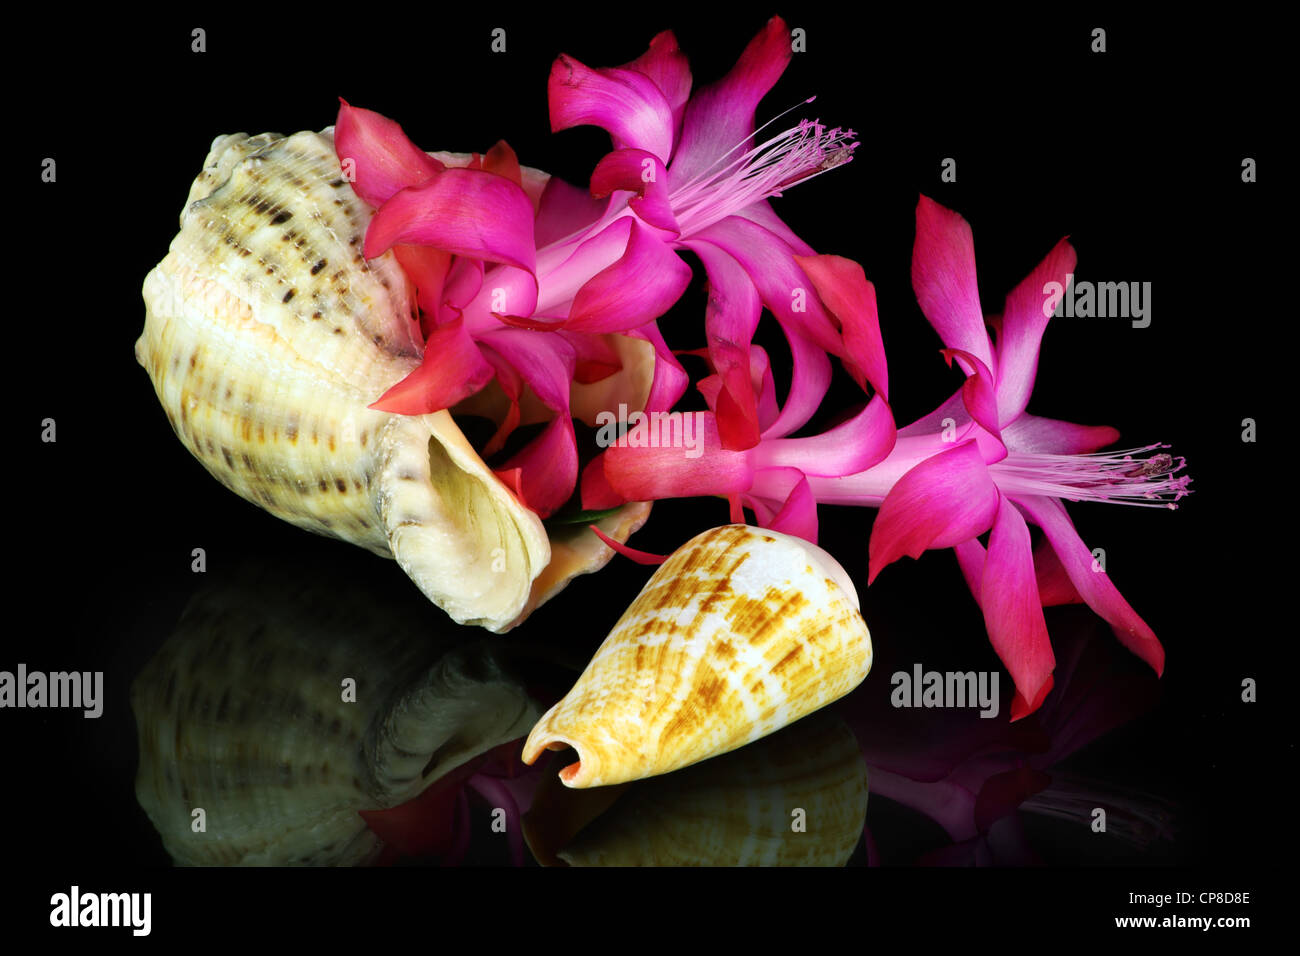 Marine cockleshell with a pink flower 'peyote' (nopal, torch thistle, cereus, cholla). Isolated on black. Stock Photo